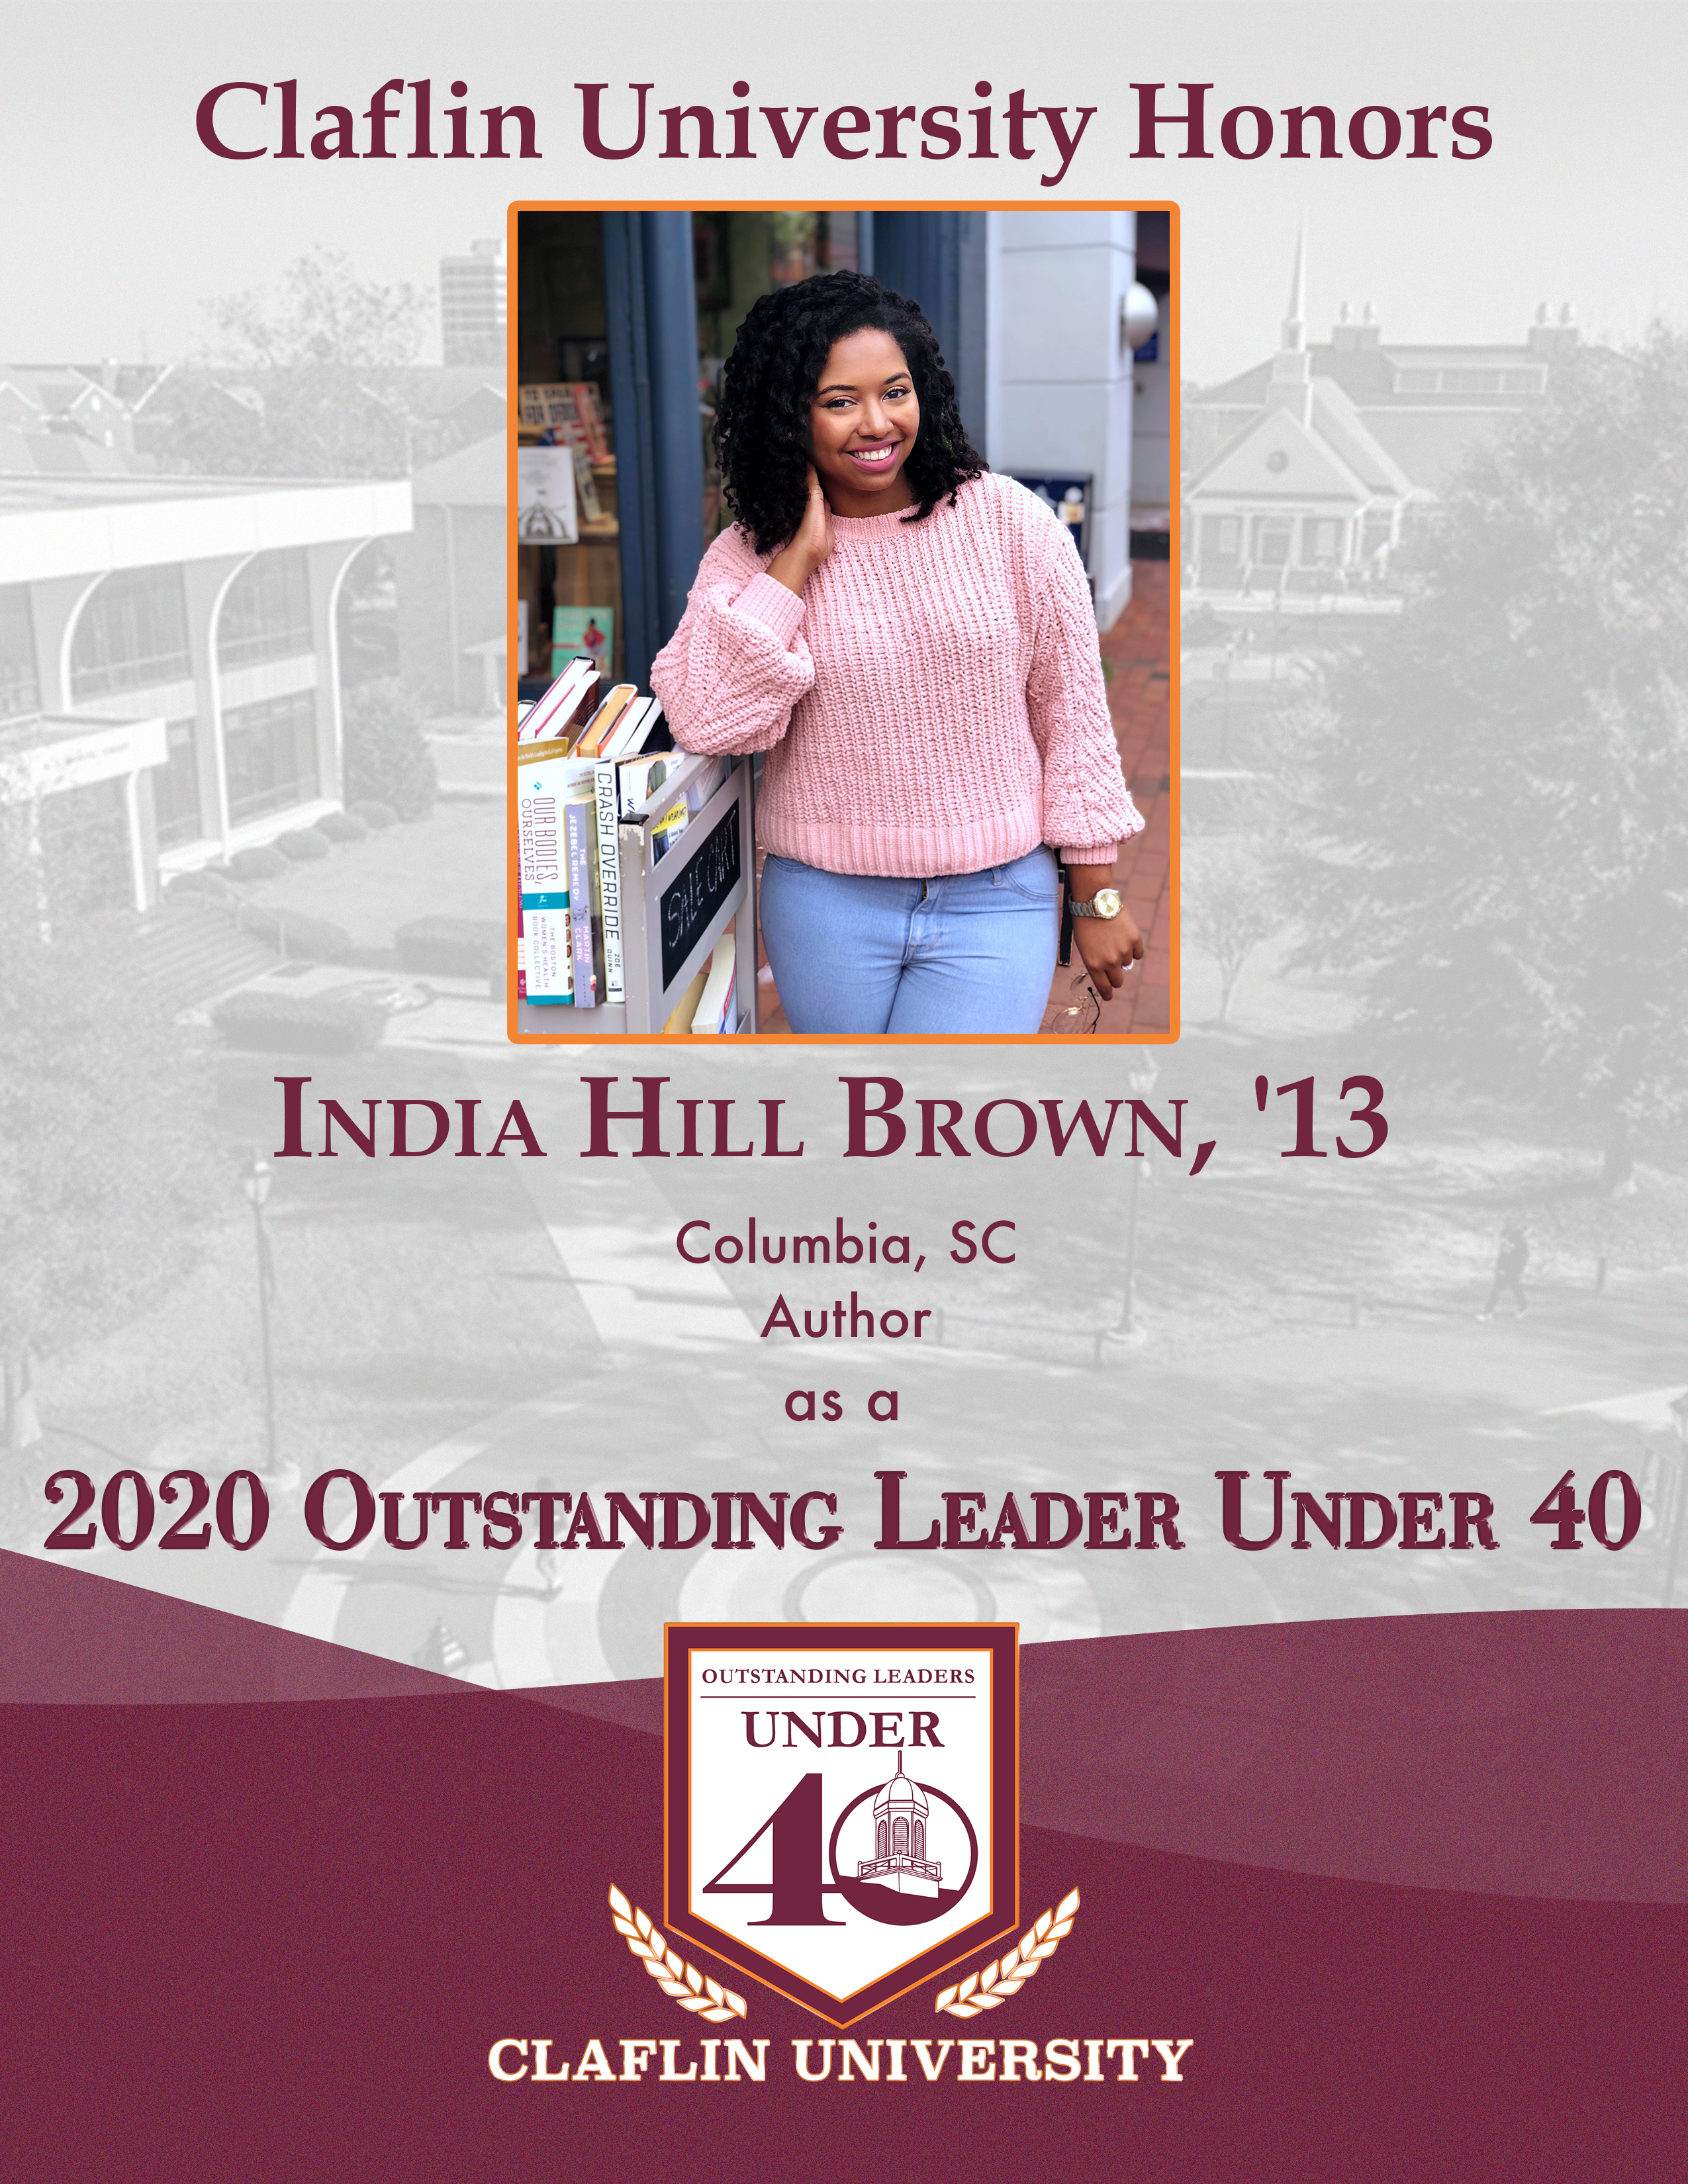 India Hill Brown